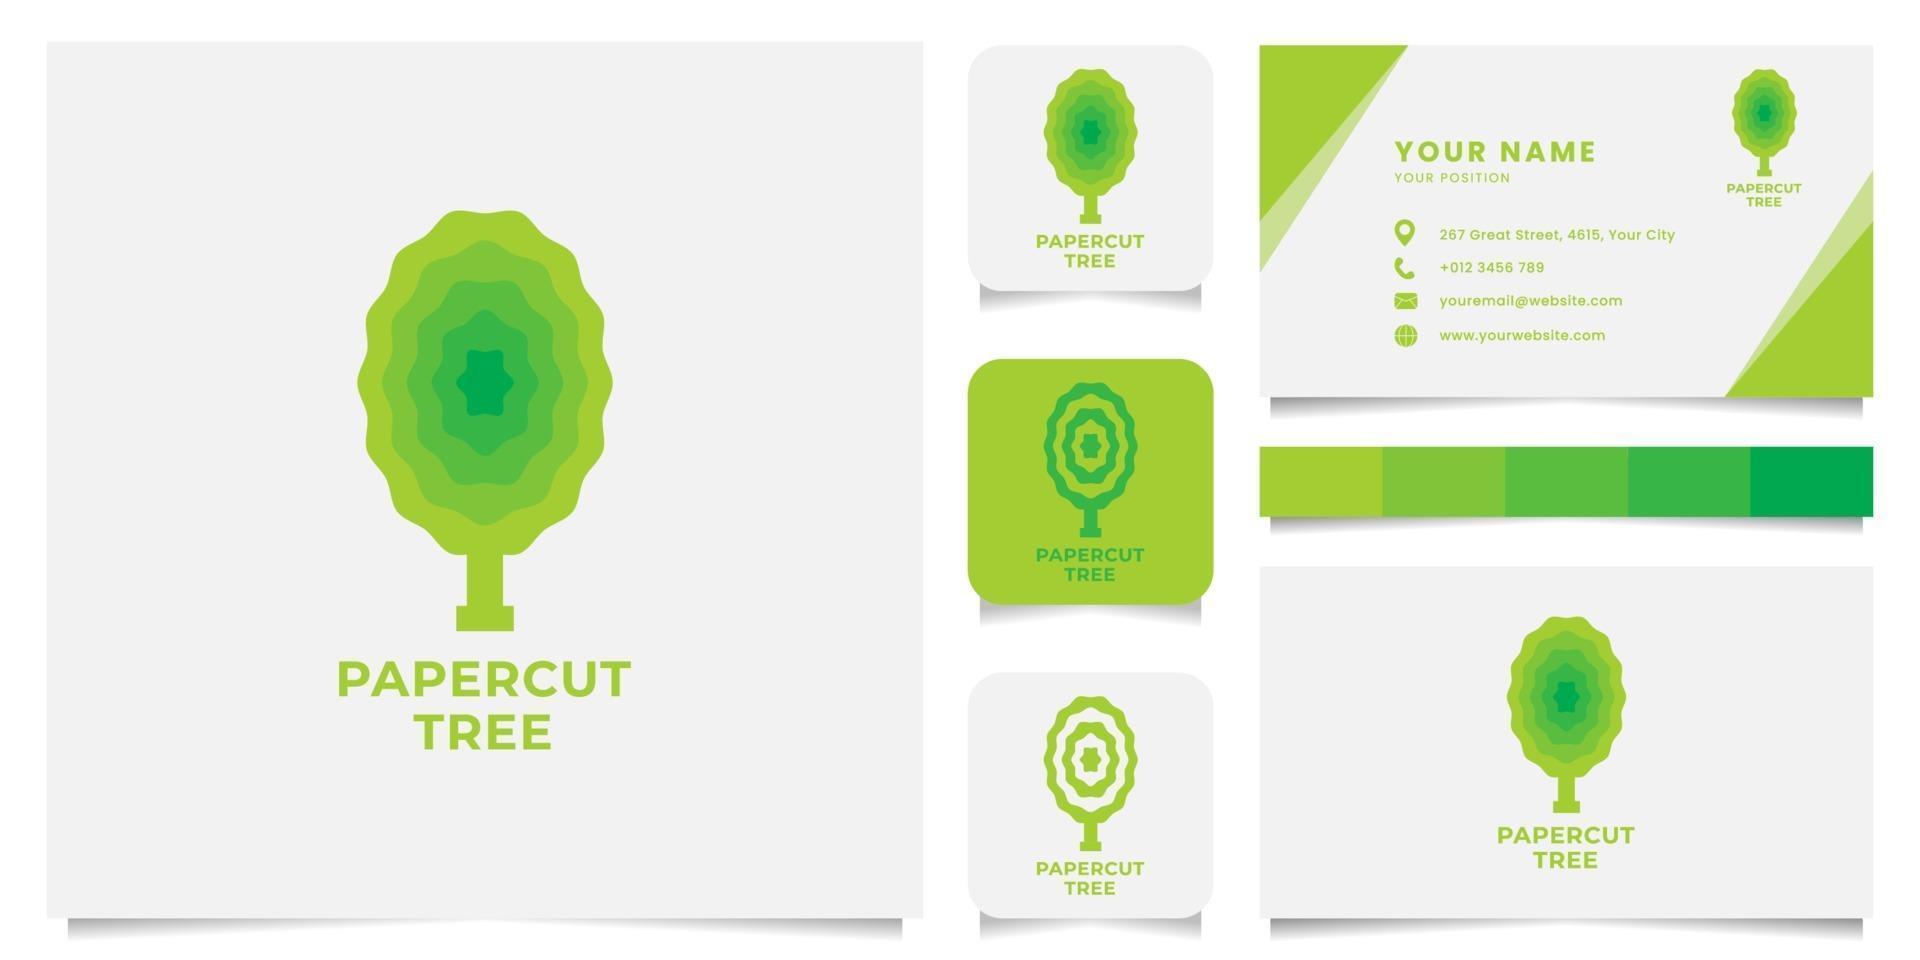 Papercut Tree Logo with Business Card Template vector